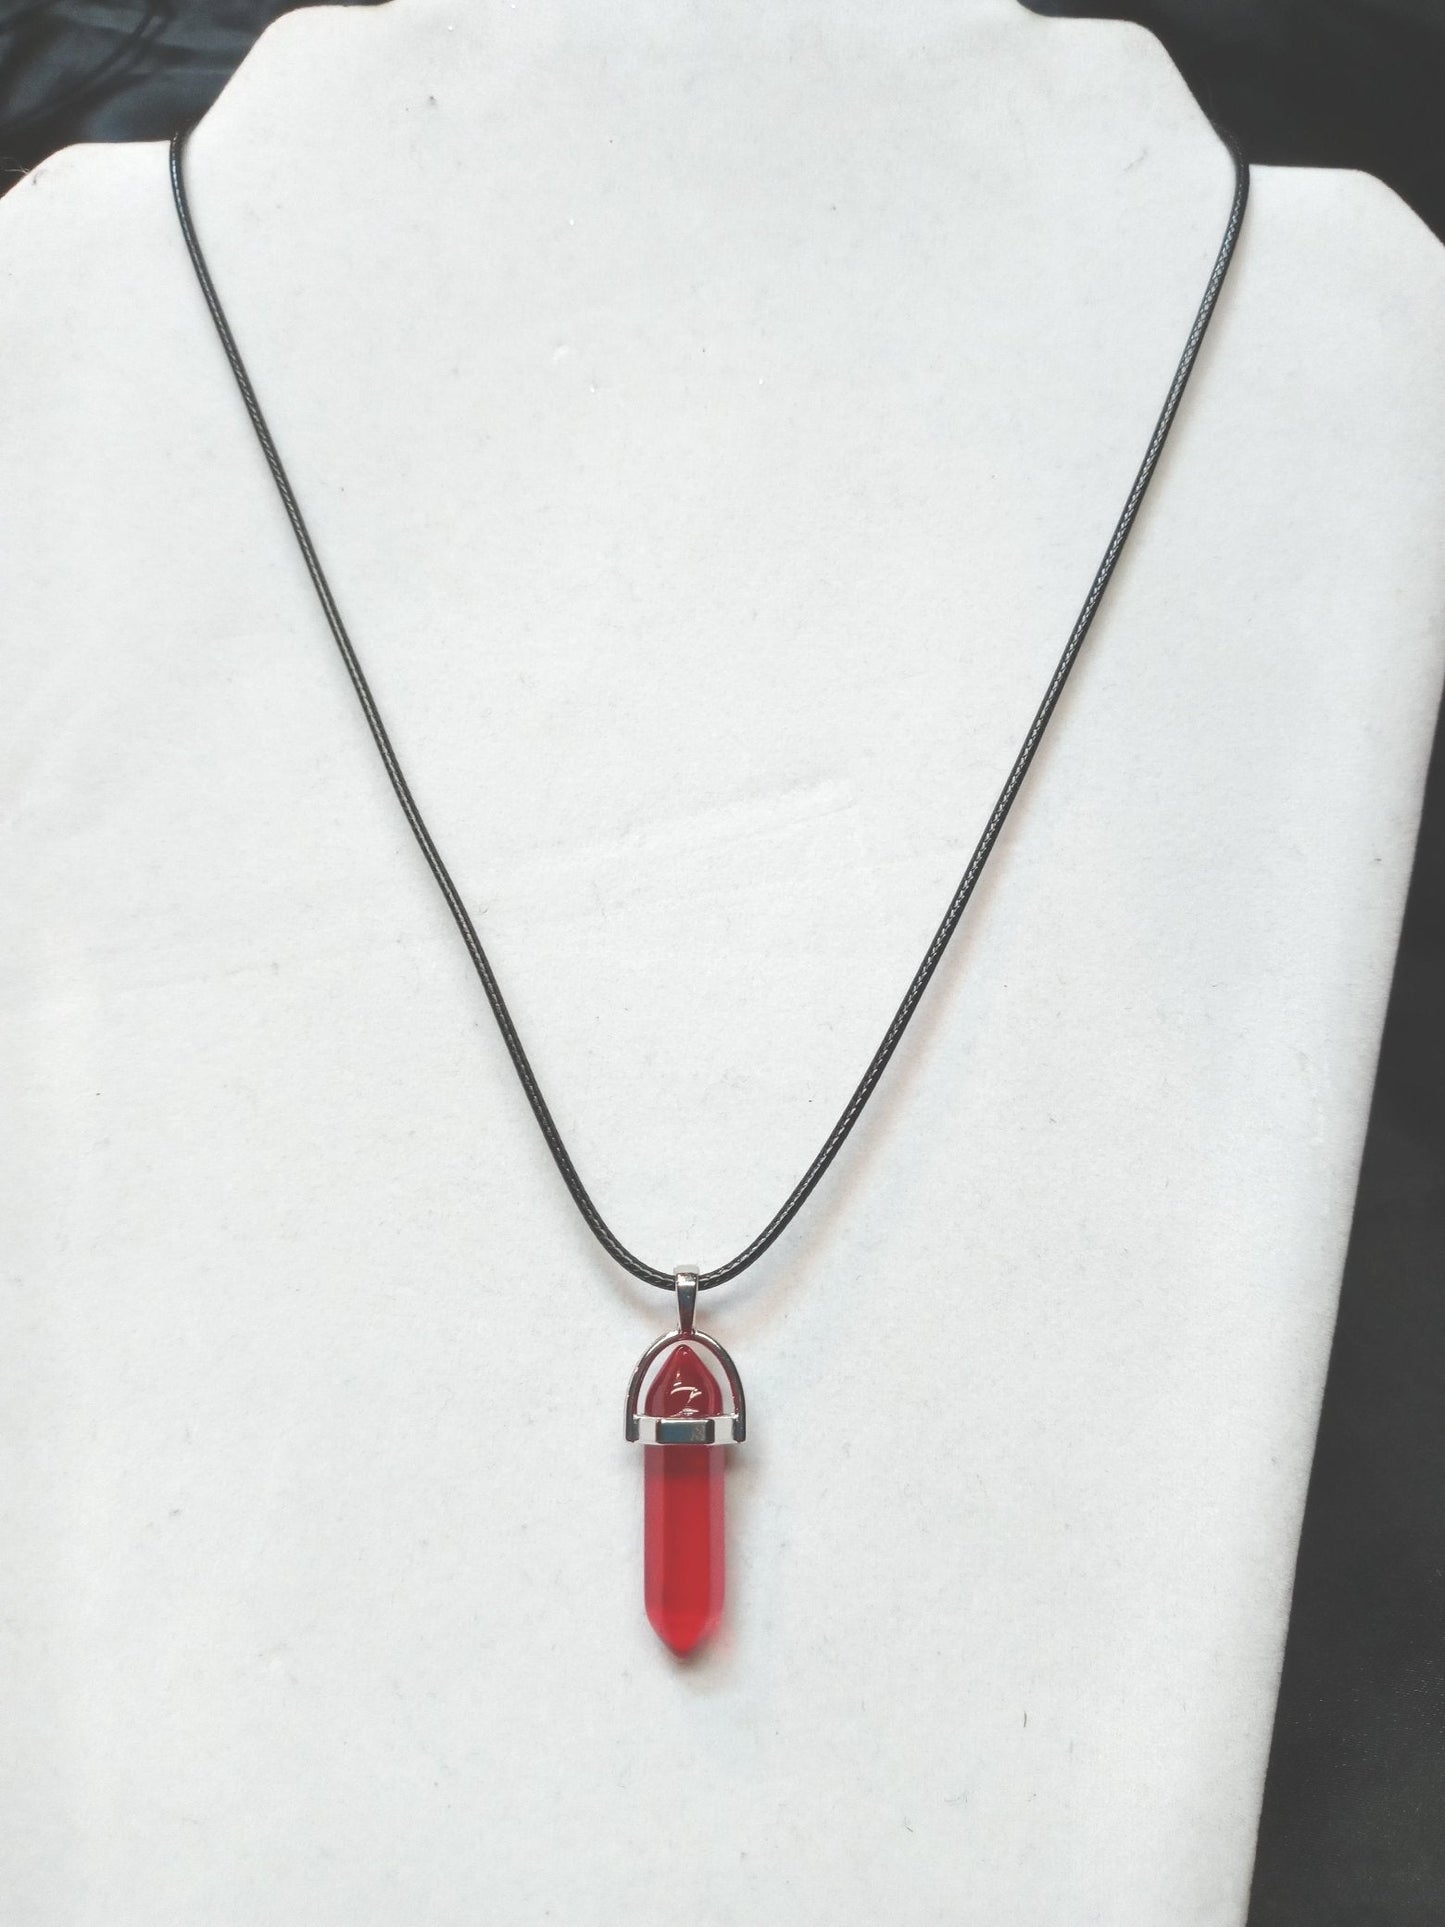 Bullet Shape Healing Stones with Black Paracord Necklace - Red Aventurine